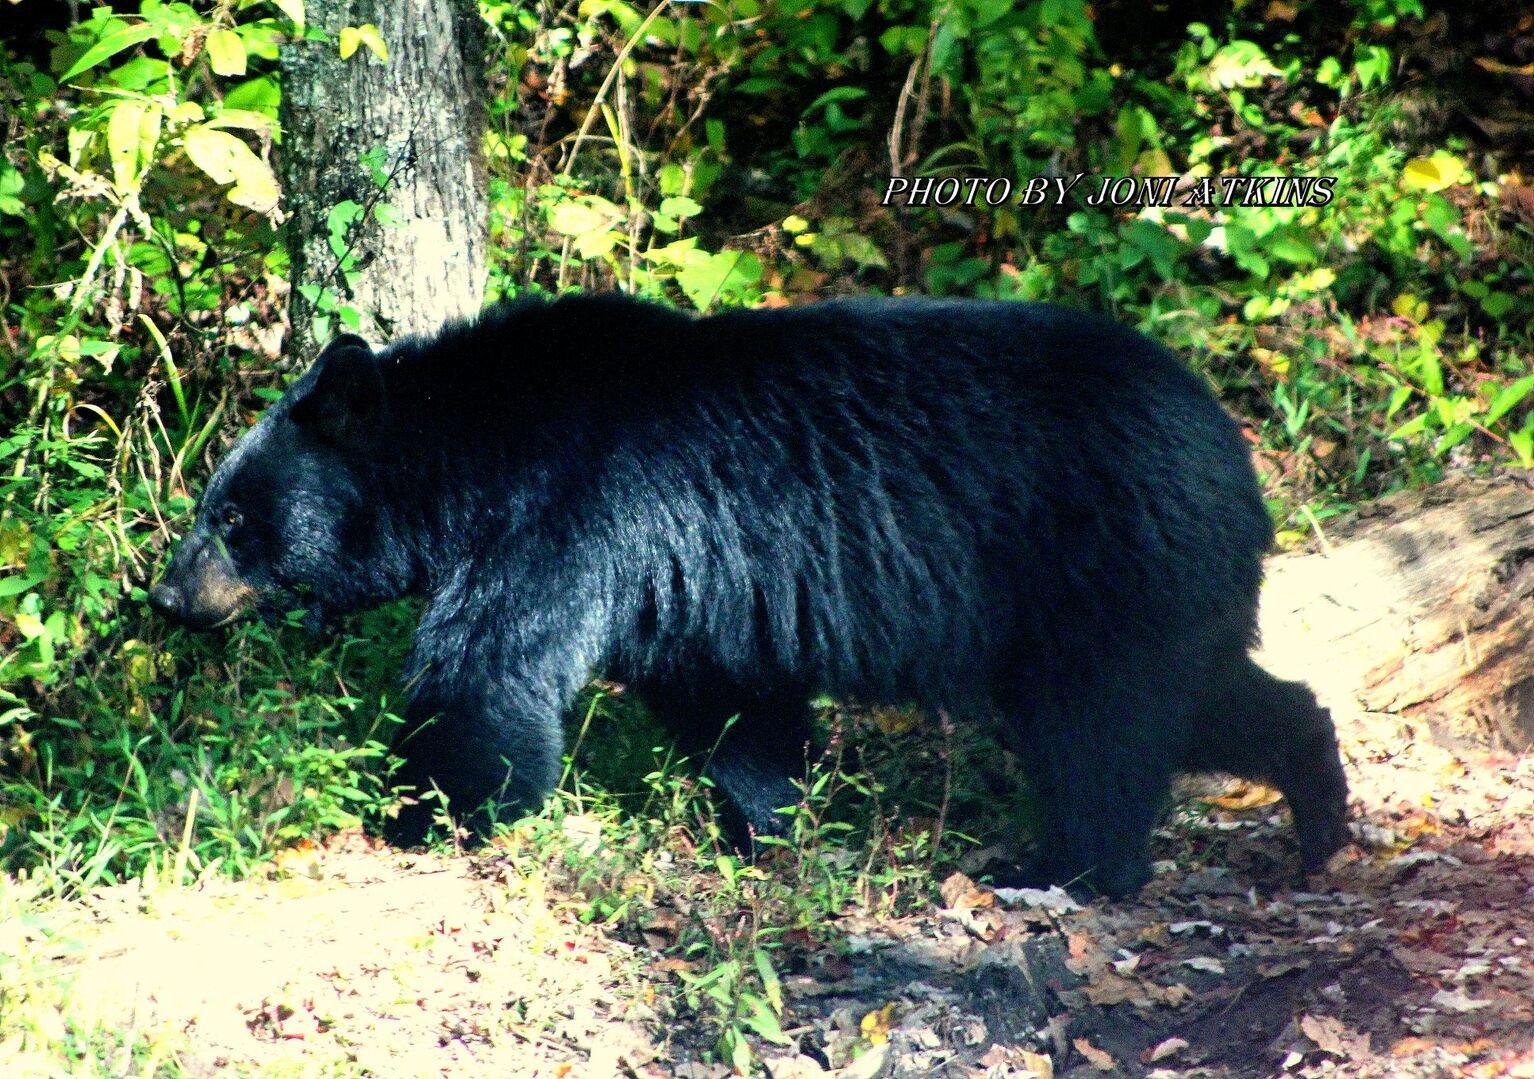 Early summer we saw this HUGE bear just strolling though Cades Cove like he owned the place, and he probably does 🙂
All photos were taken by Joni - owner